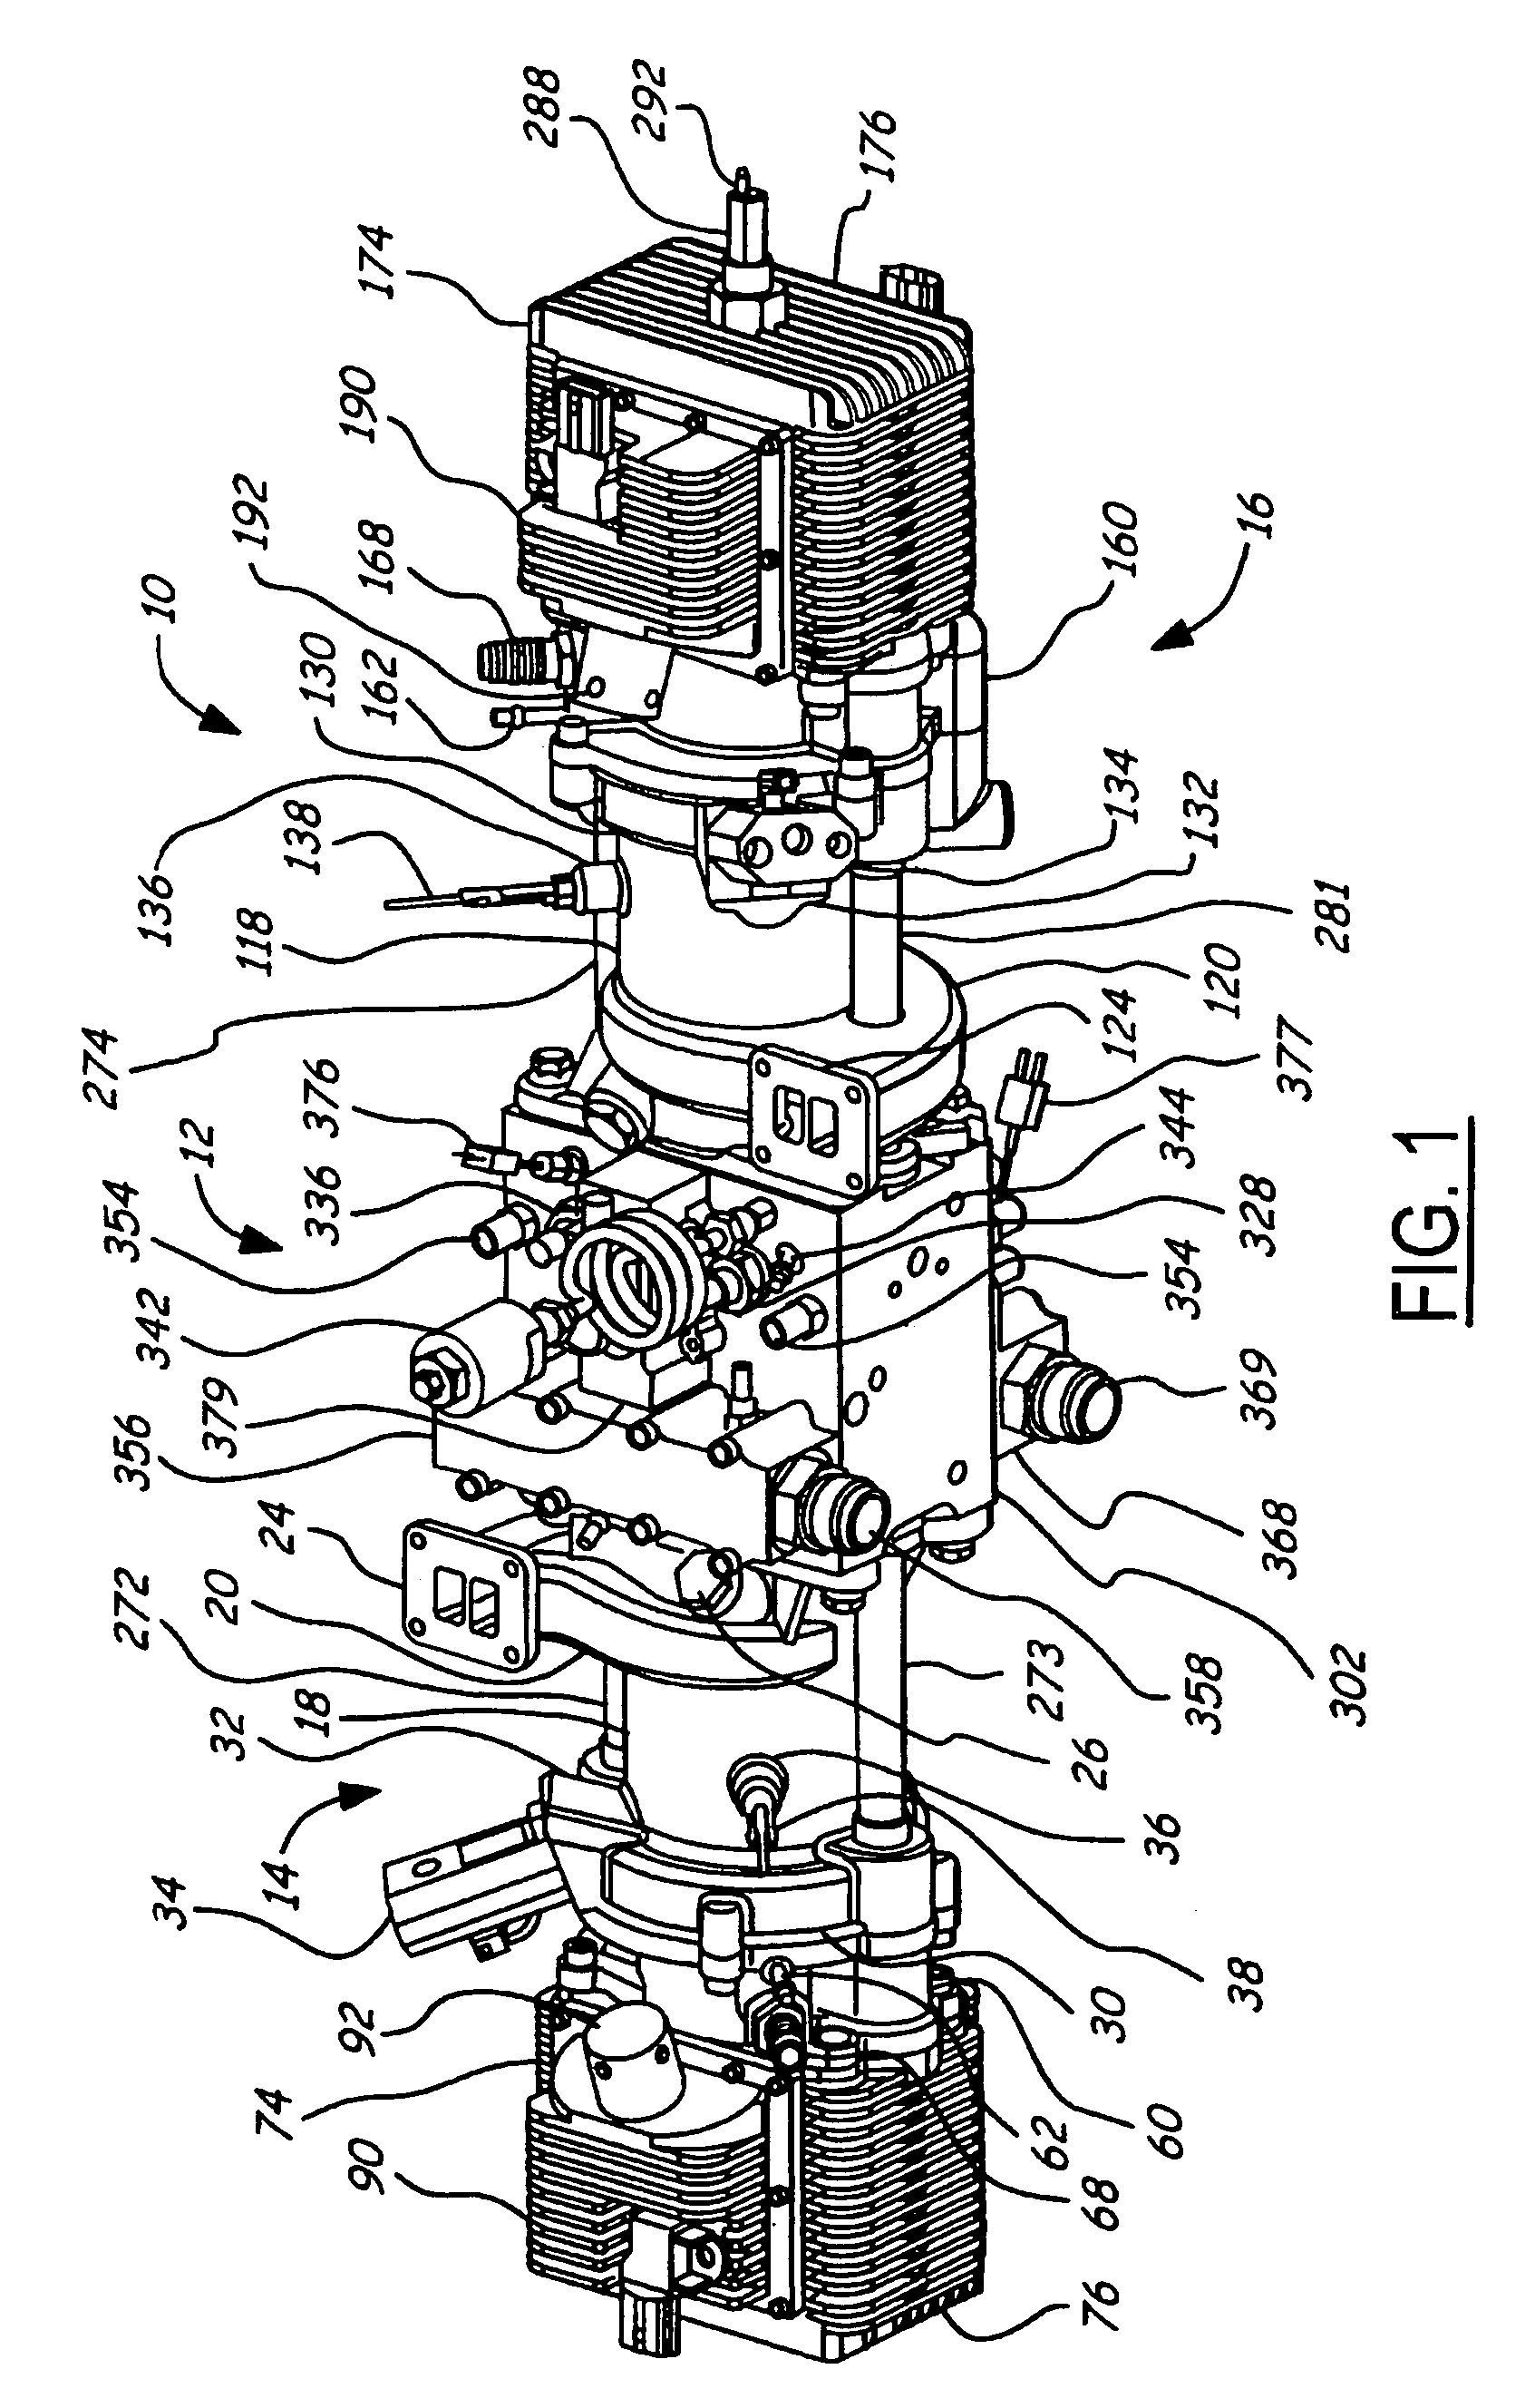 Fuel injection for a free piston engine